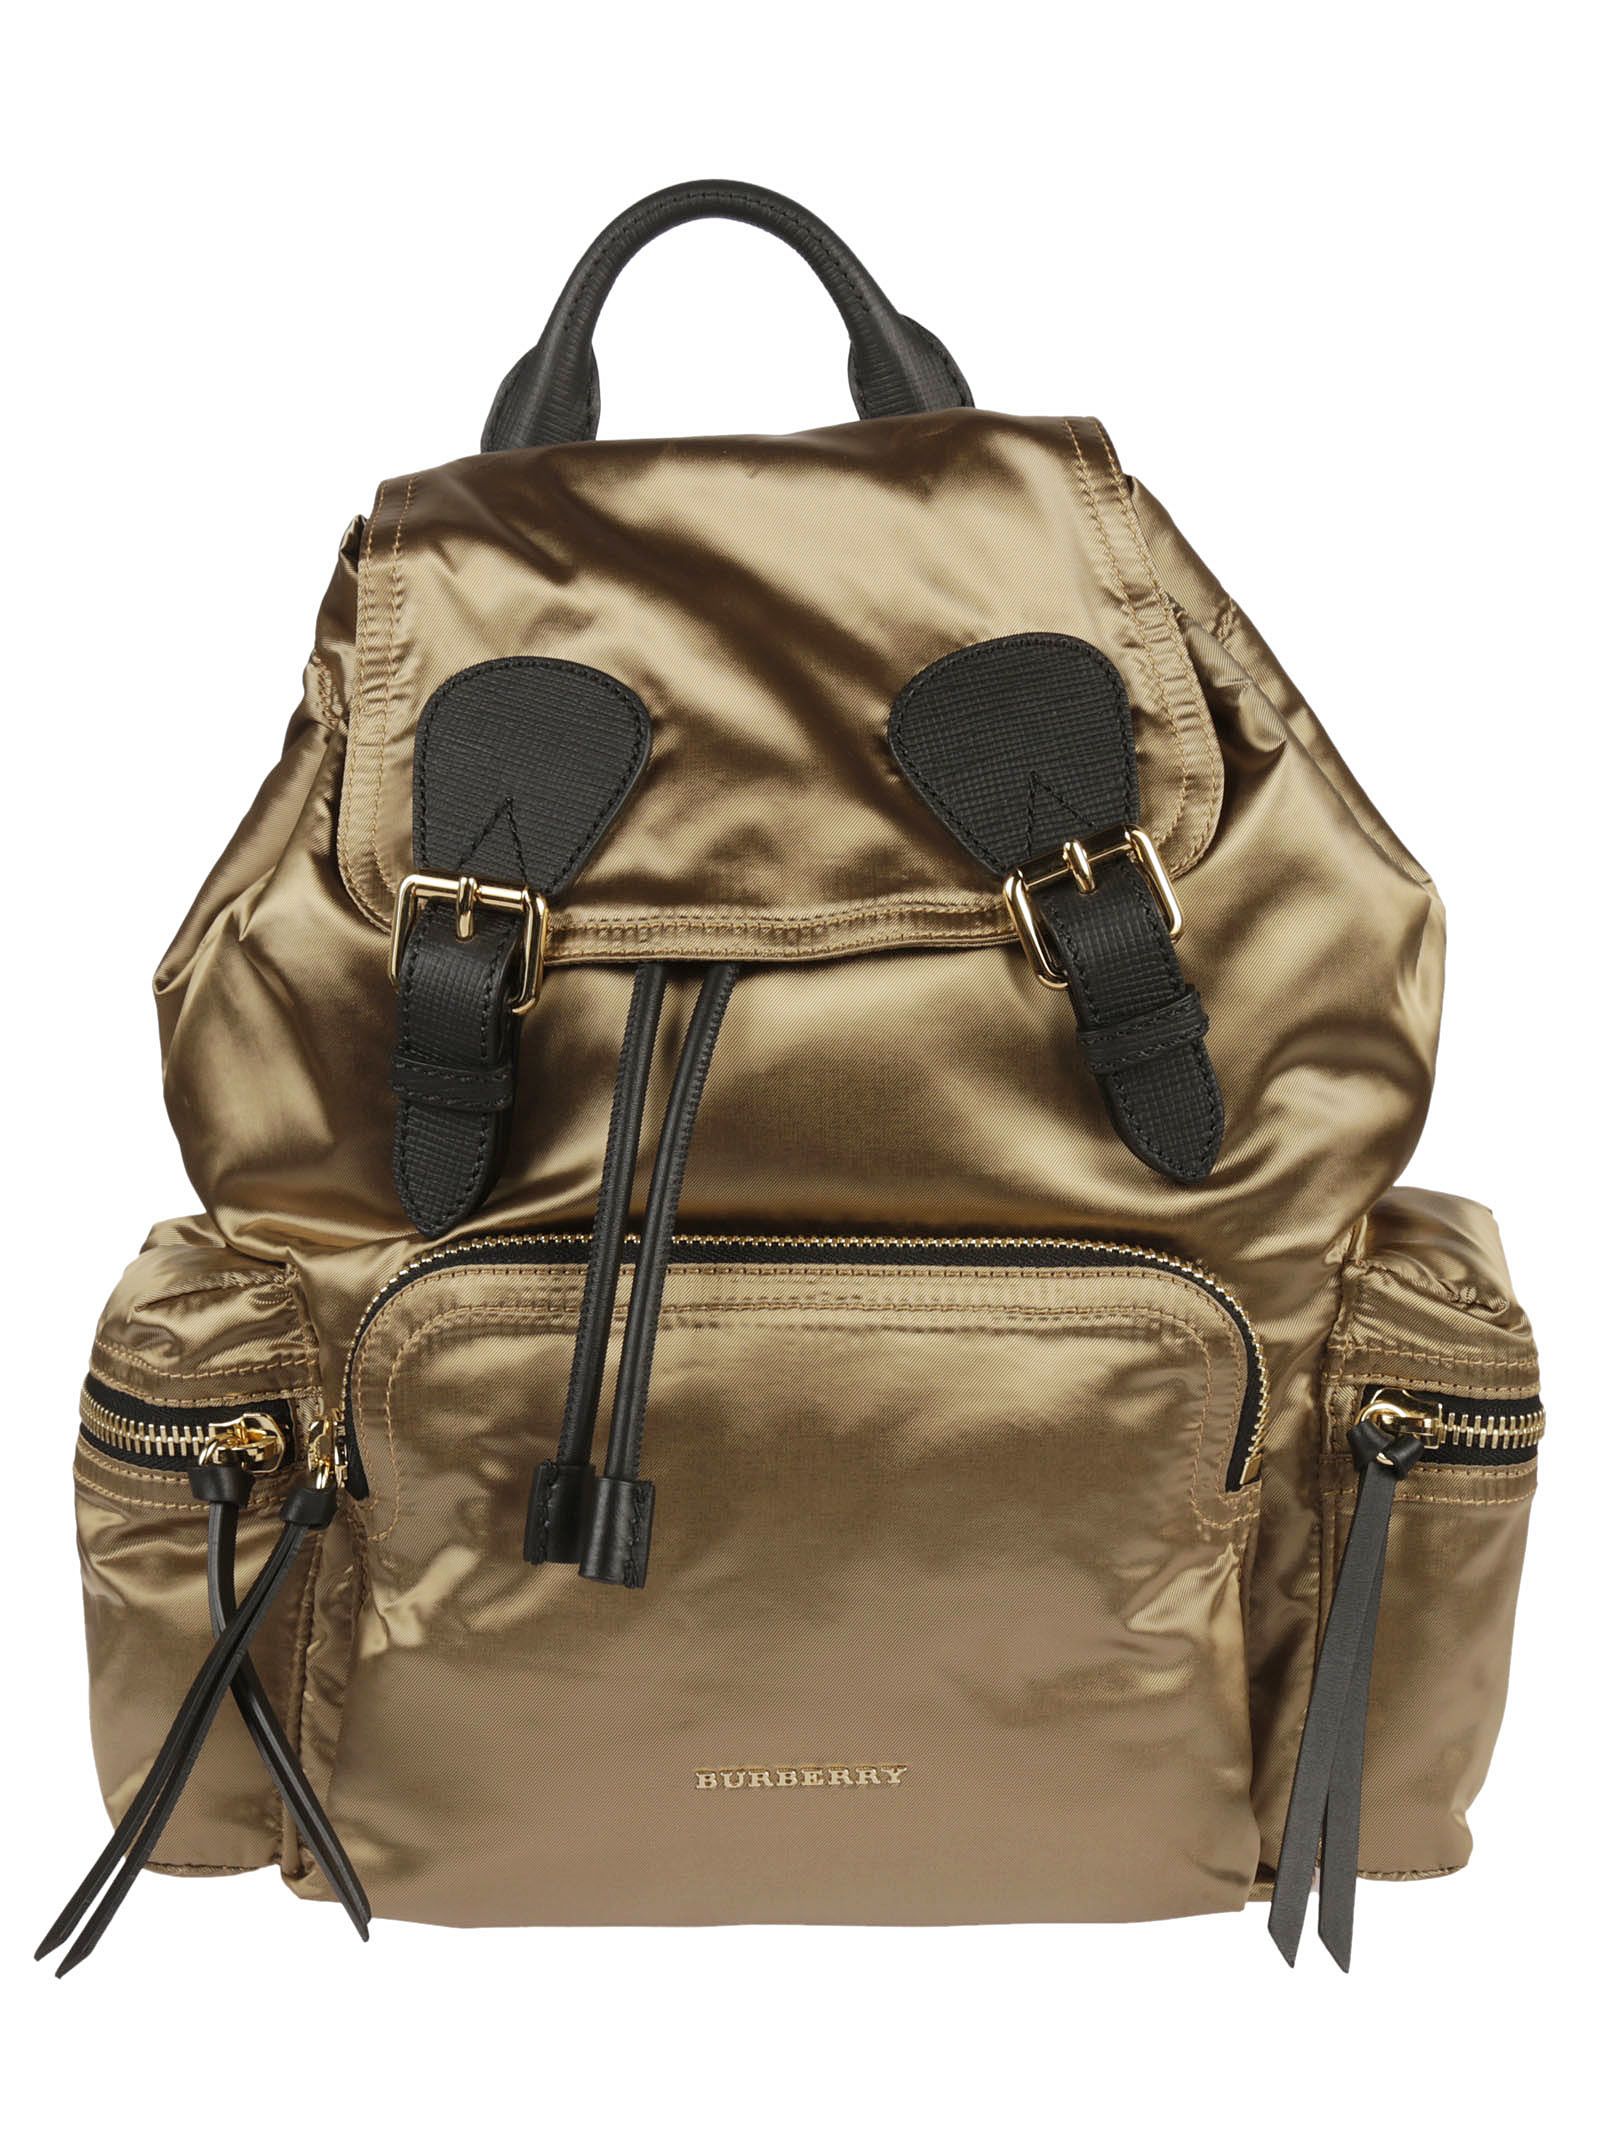 italist | Best price in the market for Burberry Burberry Rucksack ...